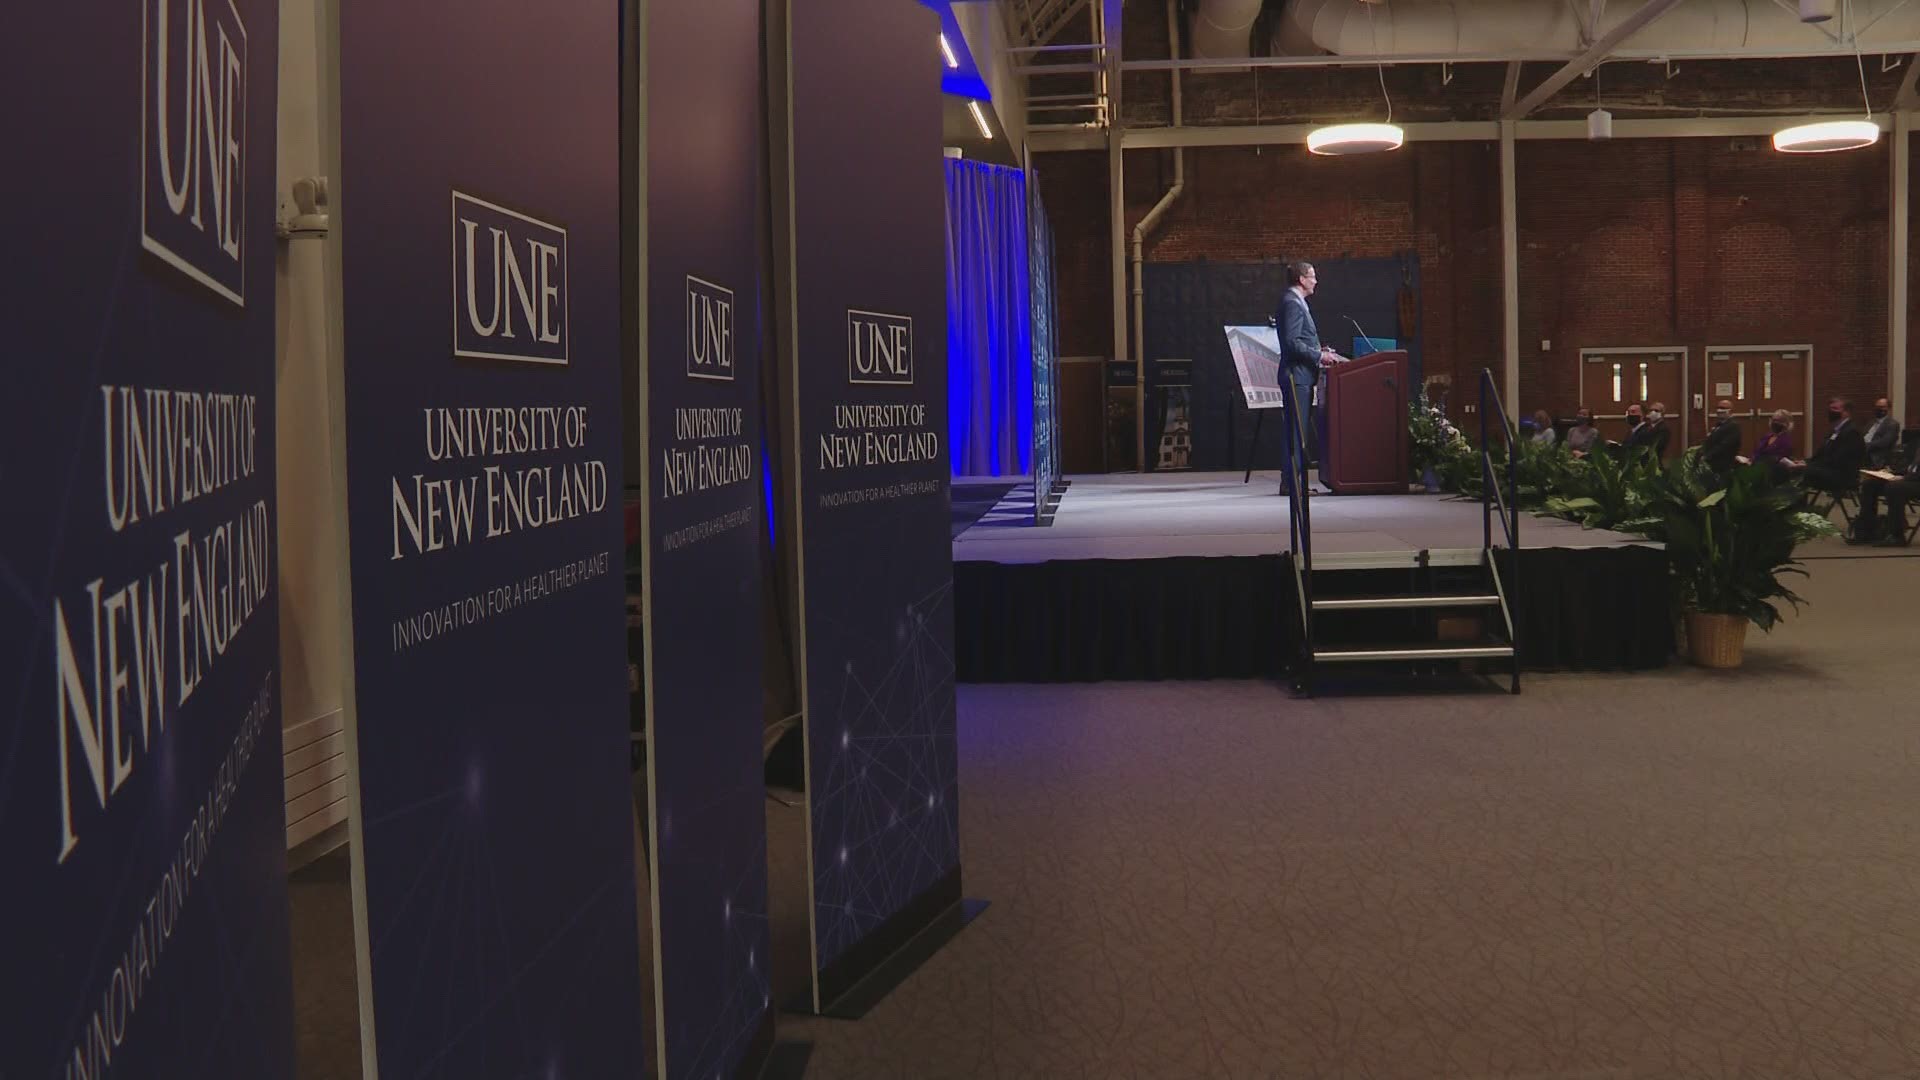 The University of New England announced it will be receiving a 30 million dollar grant from the Herald Alfond Foundation.